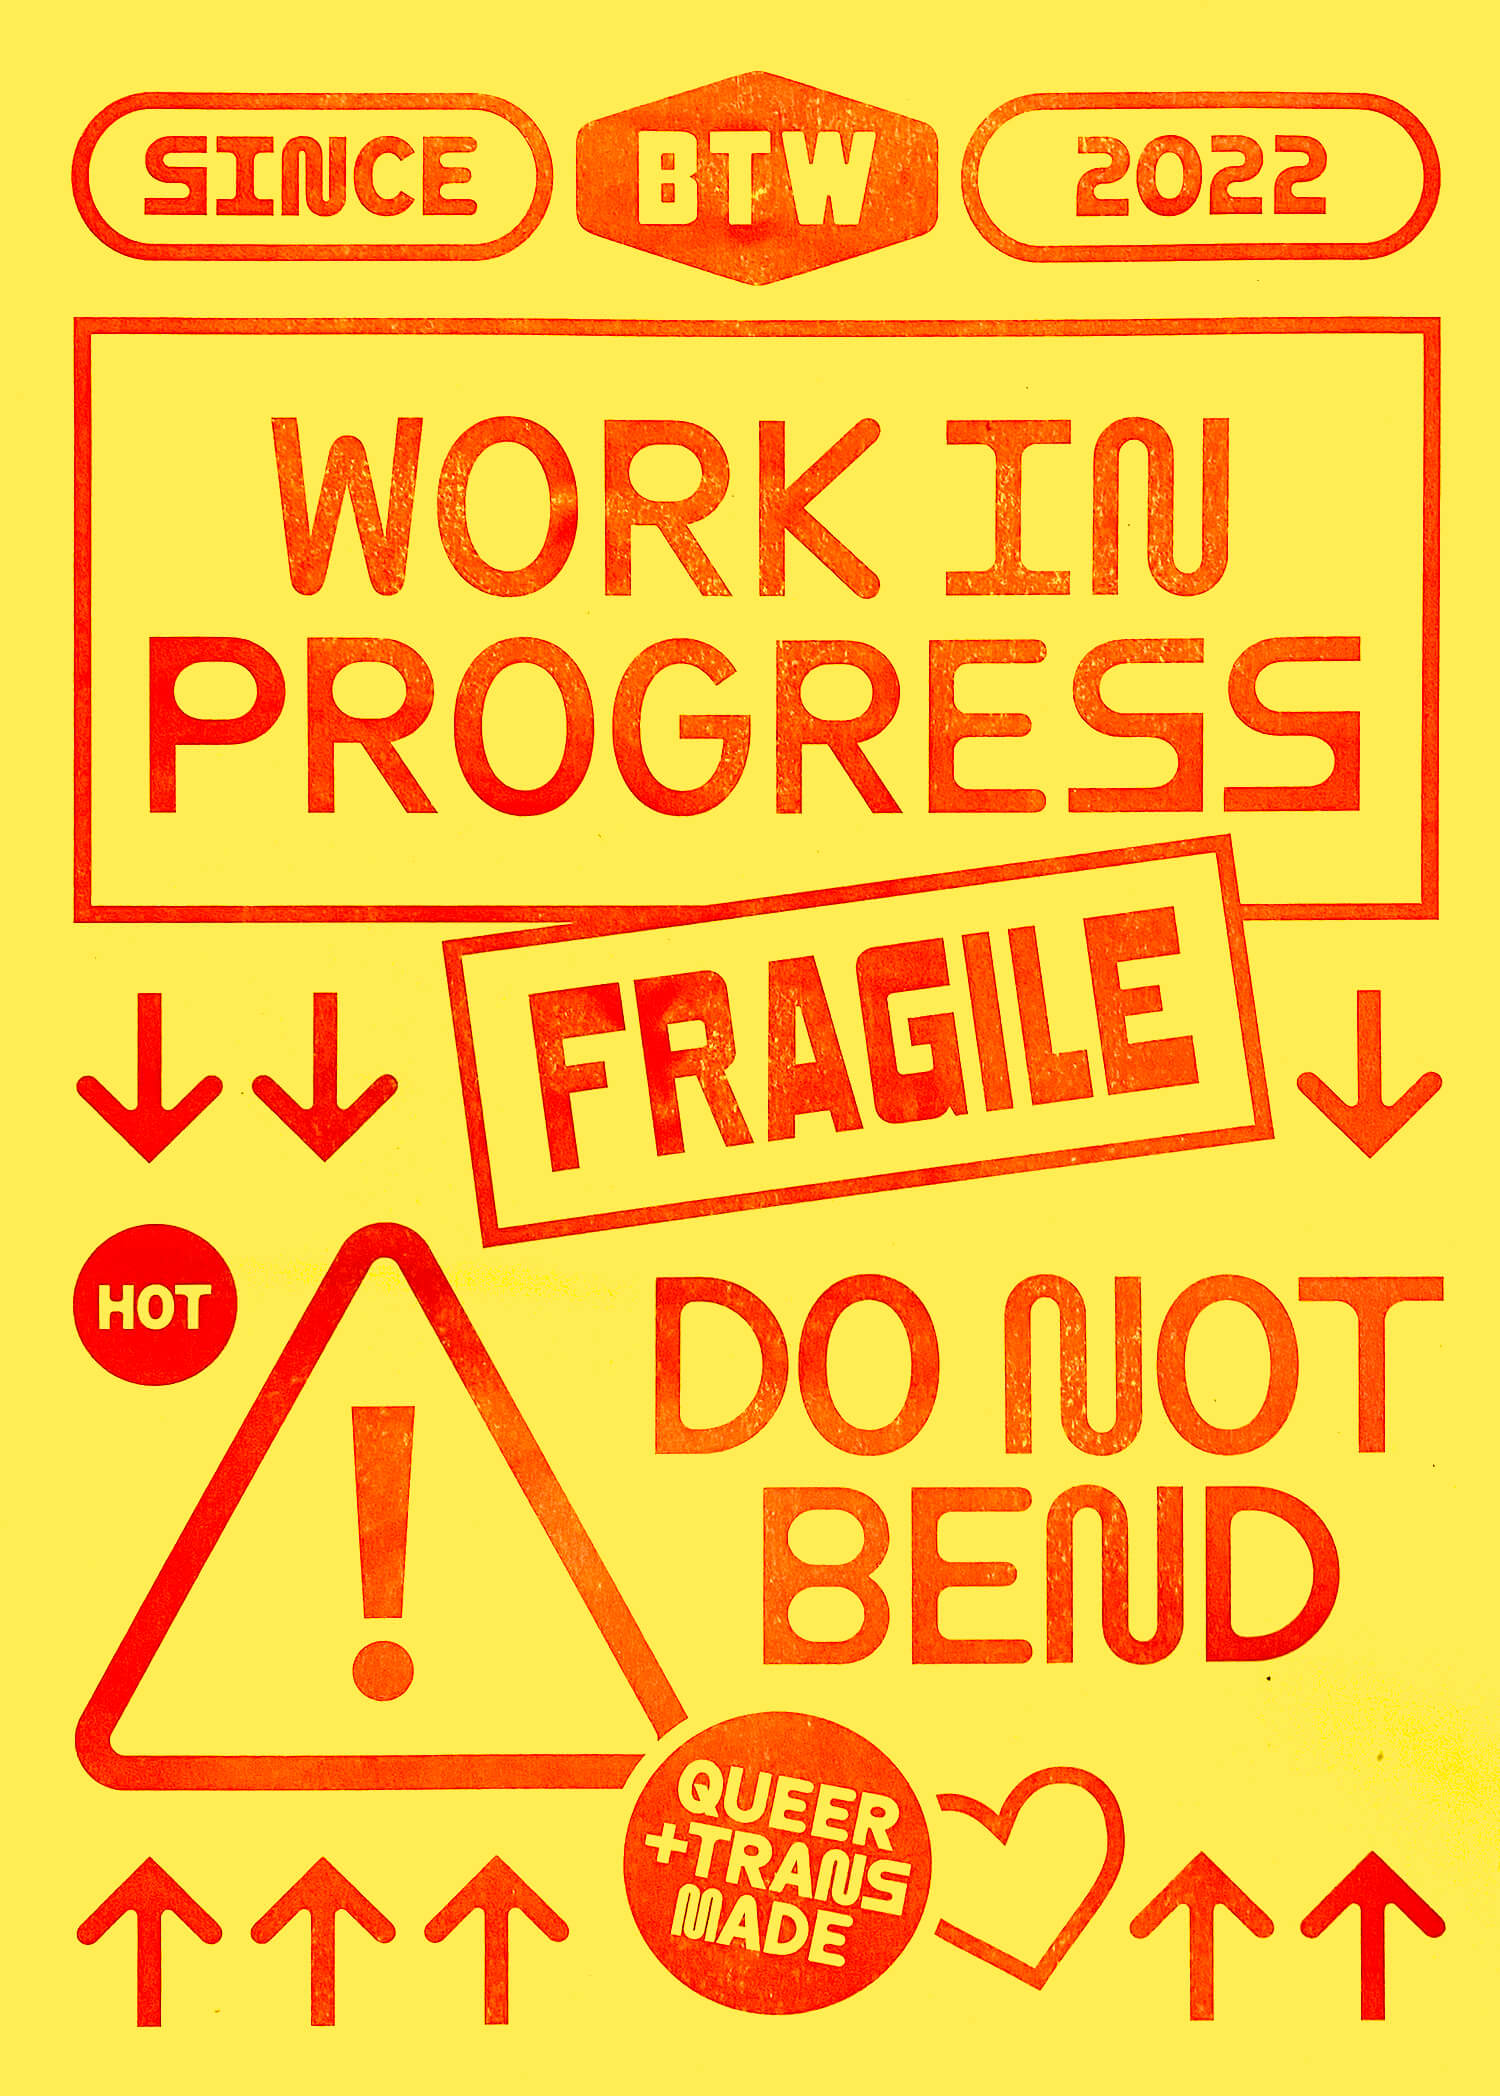 Yellow and Red text collage poster that reads BTW- Built This Way Since 2022, Work in Progress, Fragile, Hot, Do Not Bend, and Queer + Trans Made. Risograph